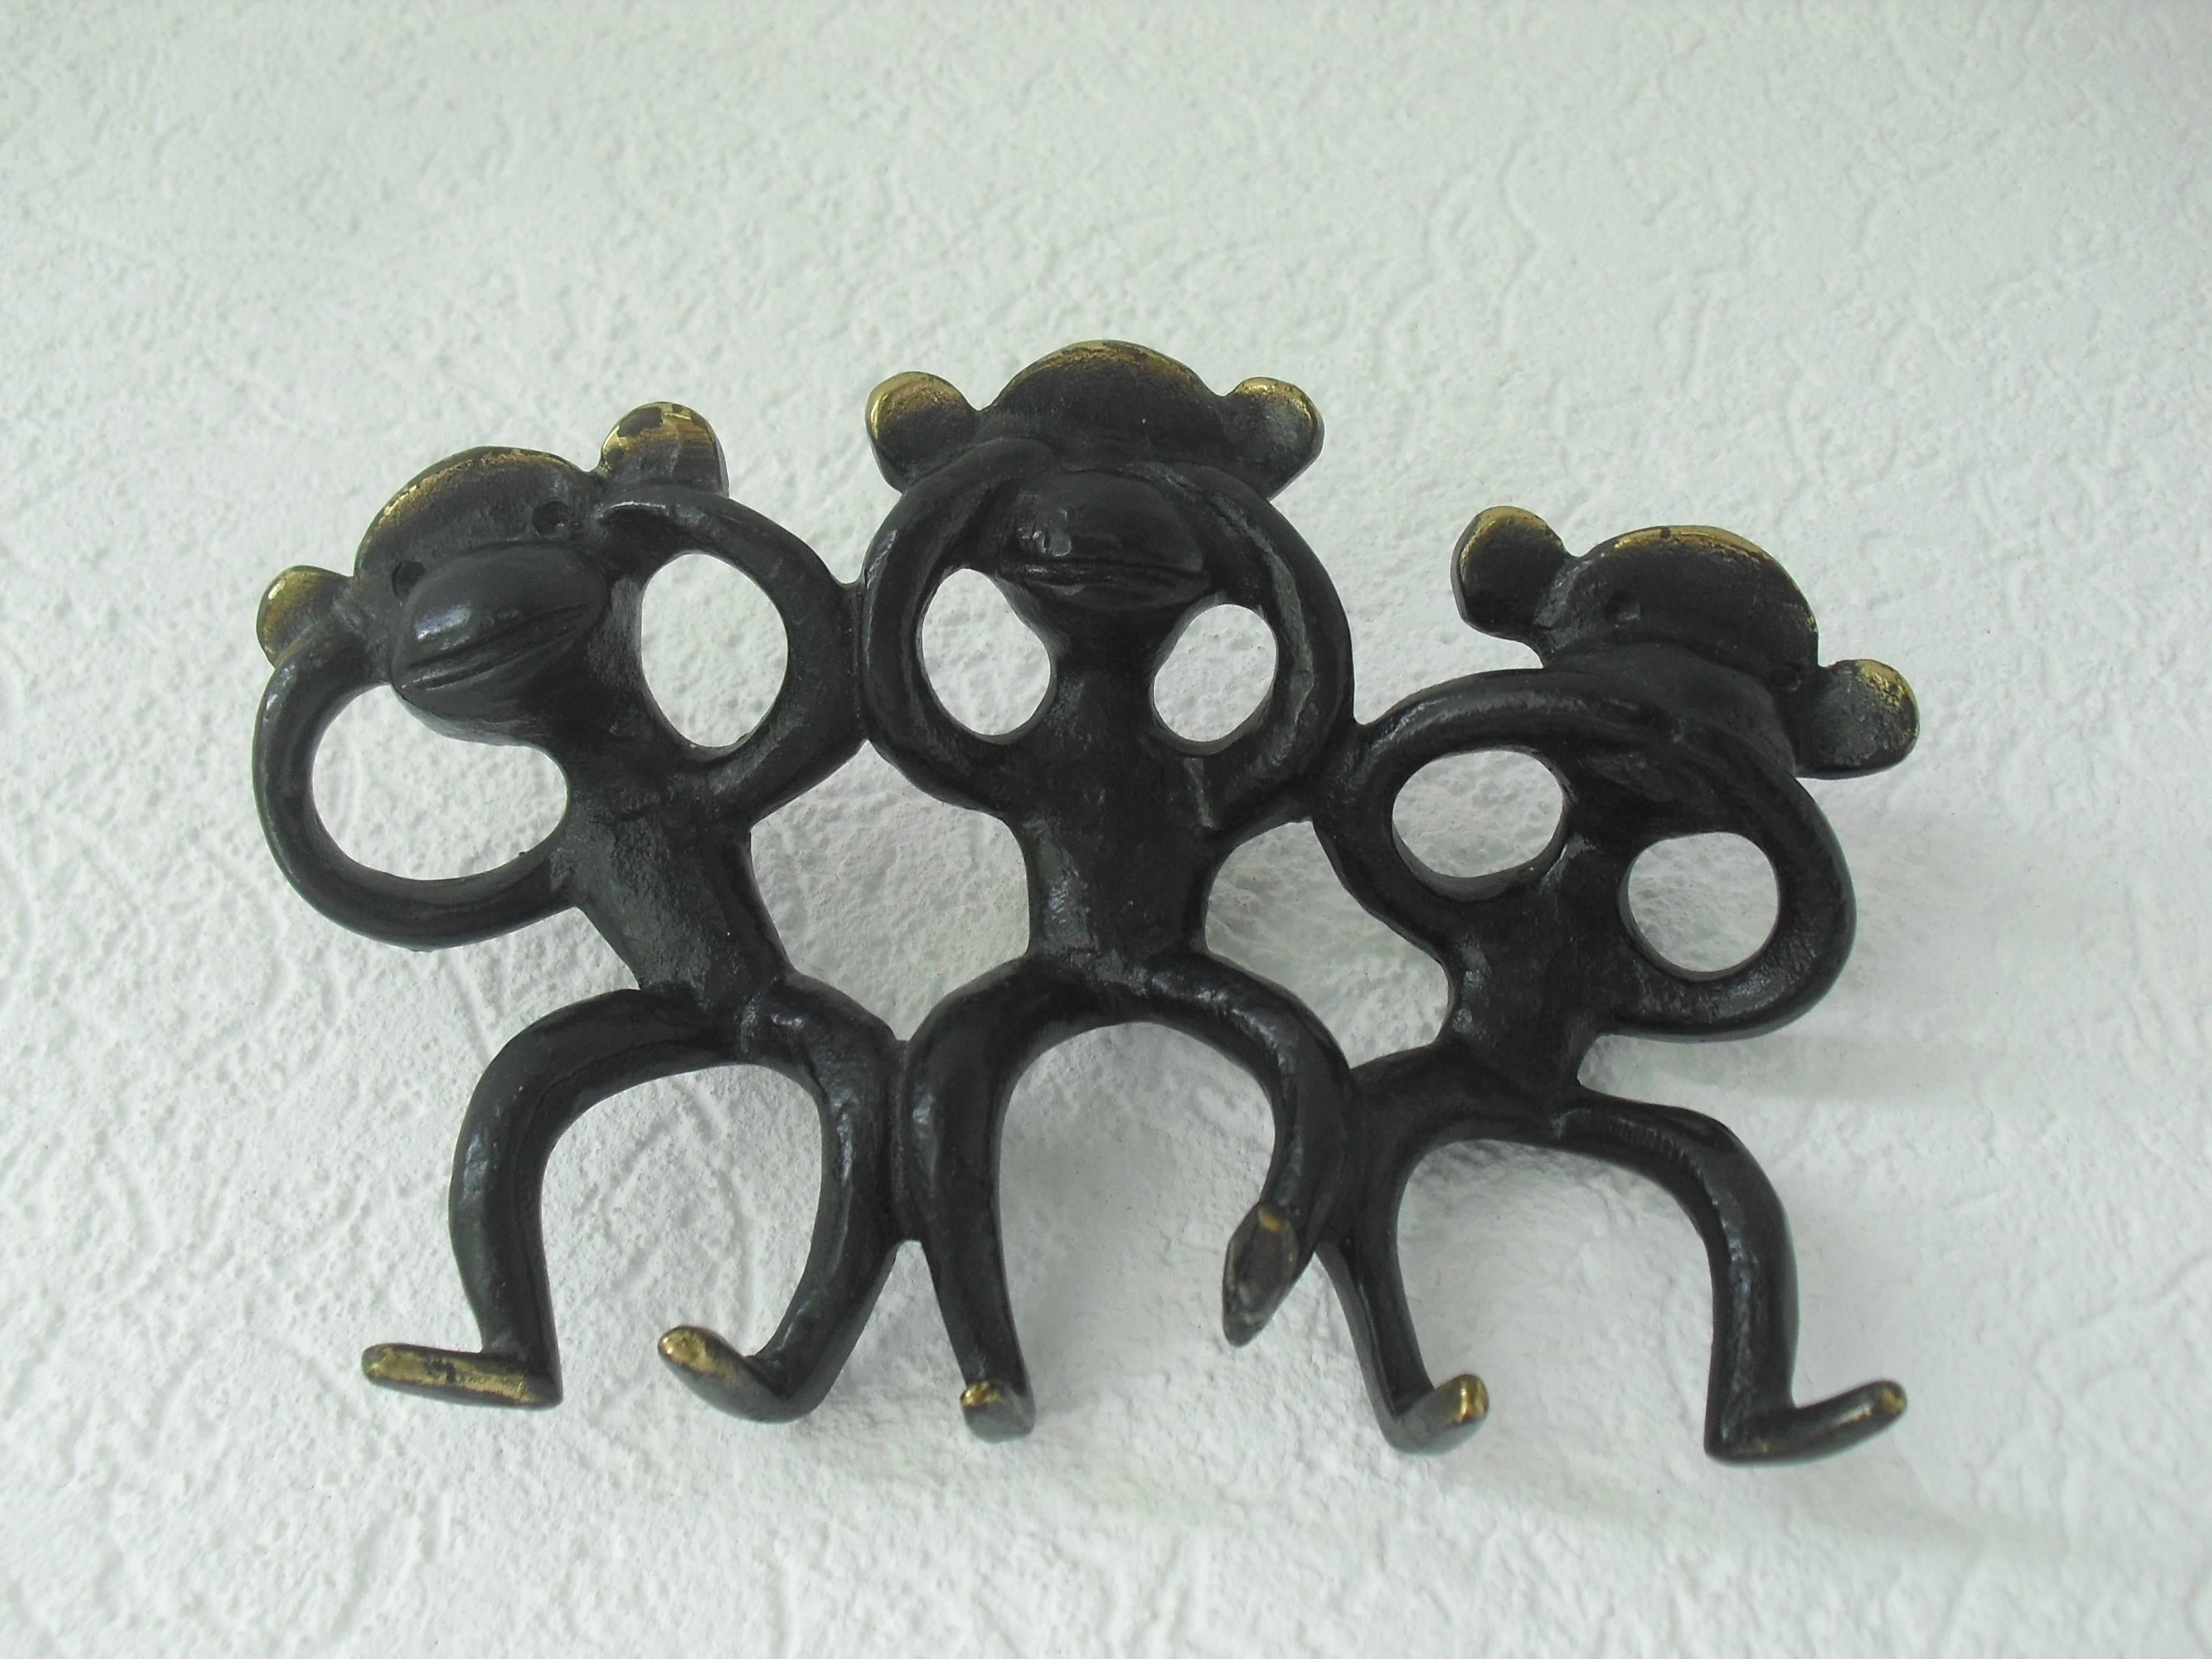 Funky blackened brass ape figurine key holder designed by Walter Bosse for Hertha Baller, Austria during the 1950s.

This is one of those items that makes you smile!